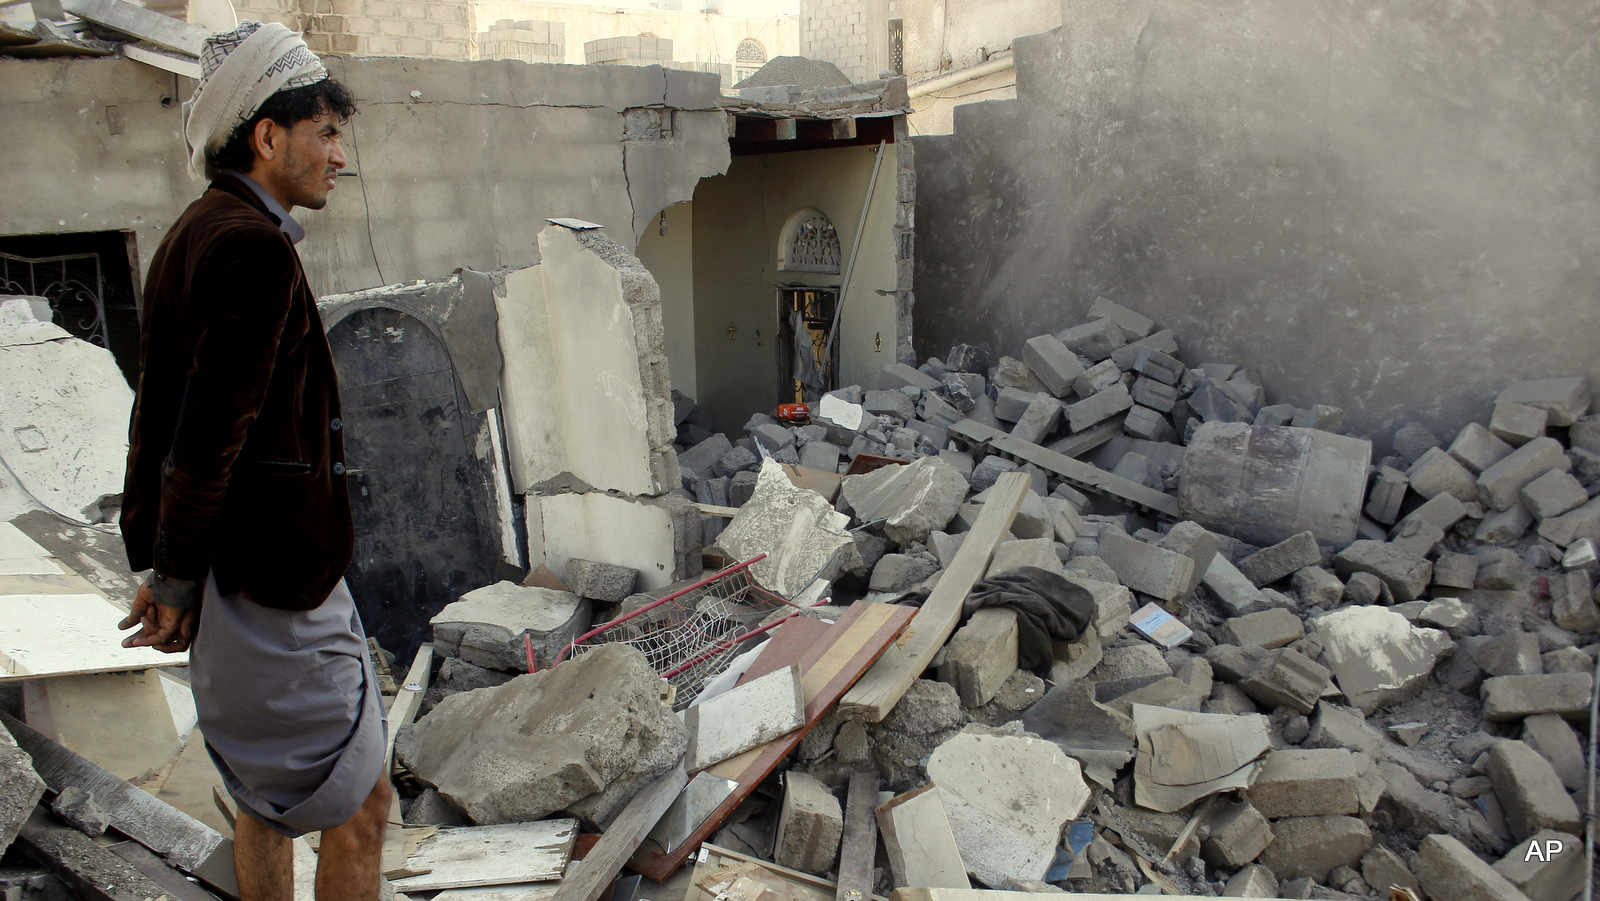 A Yemeni man stands at his house destroyed by Saudi airstrikes near Sanaa Airport, Yemen, Tuesday, March 31, 2015. (AP Photo/Hani Mohammed)